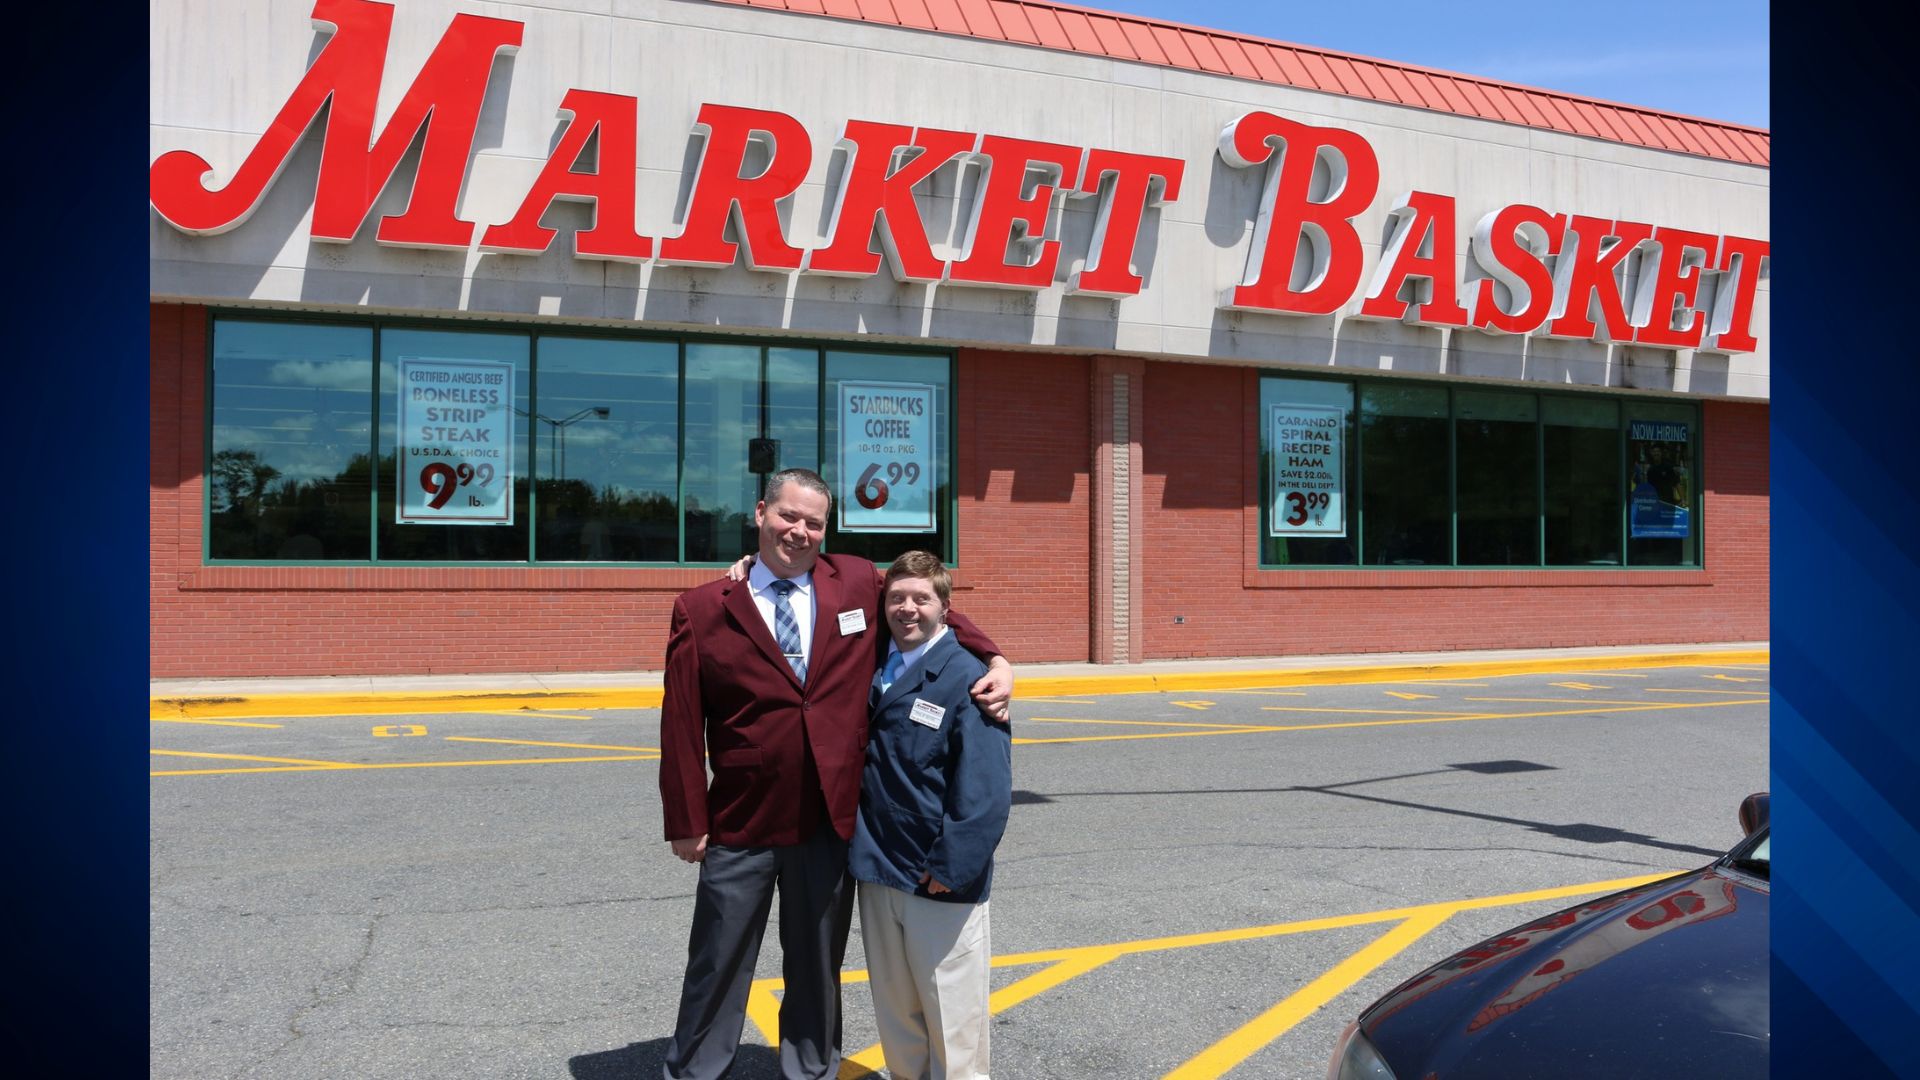 A new Market Basket in Lowell, and 300 jobs, amid coronavirus